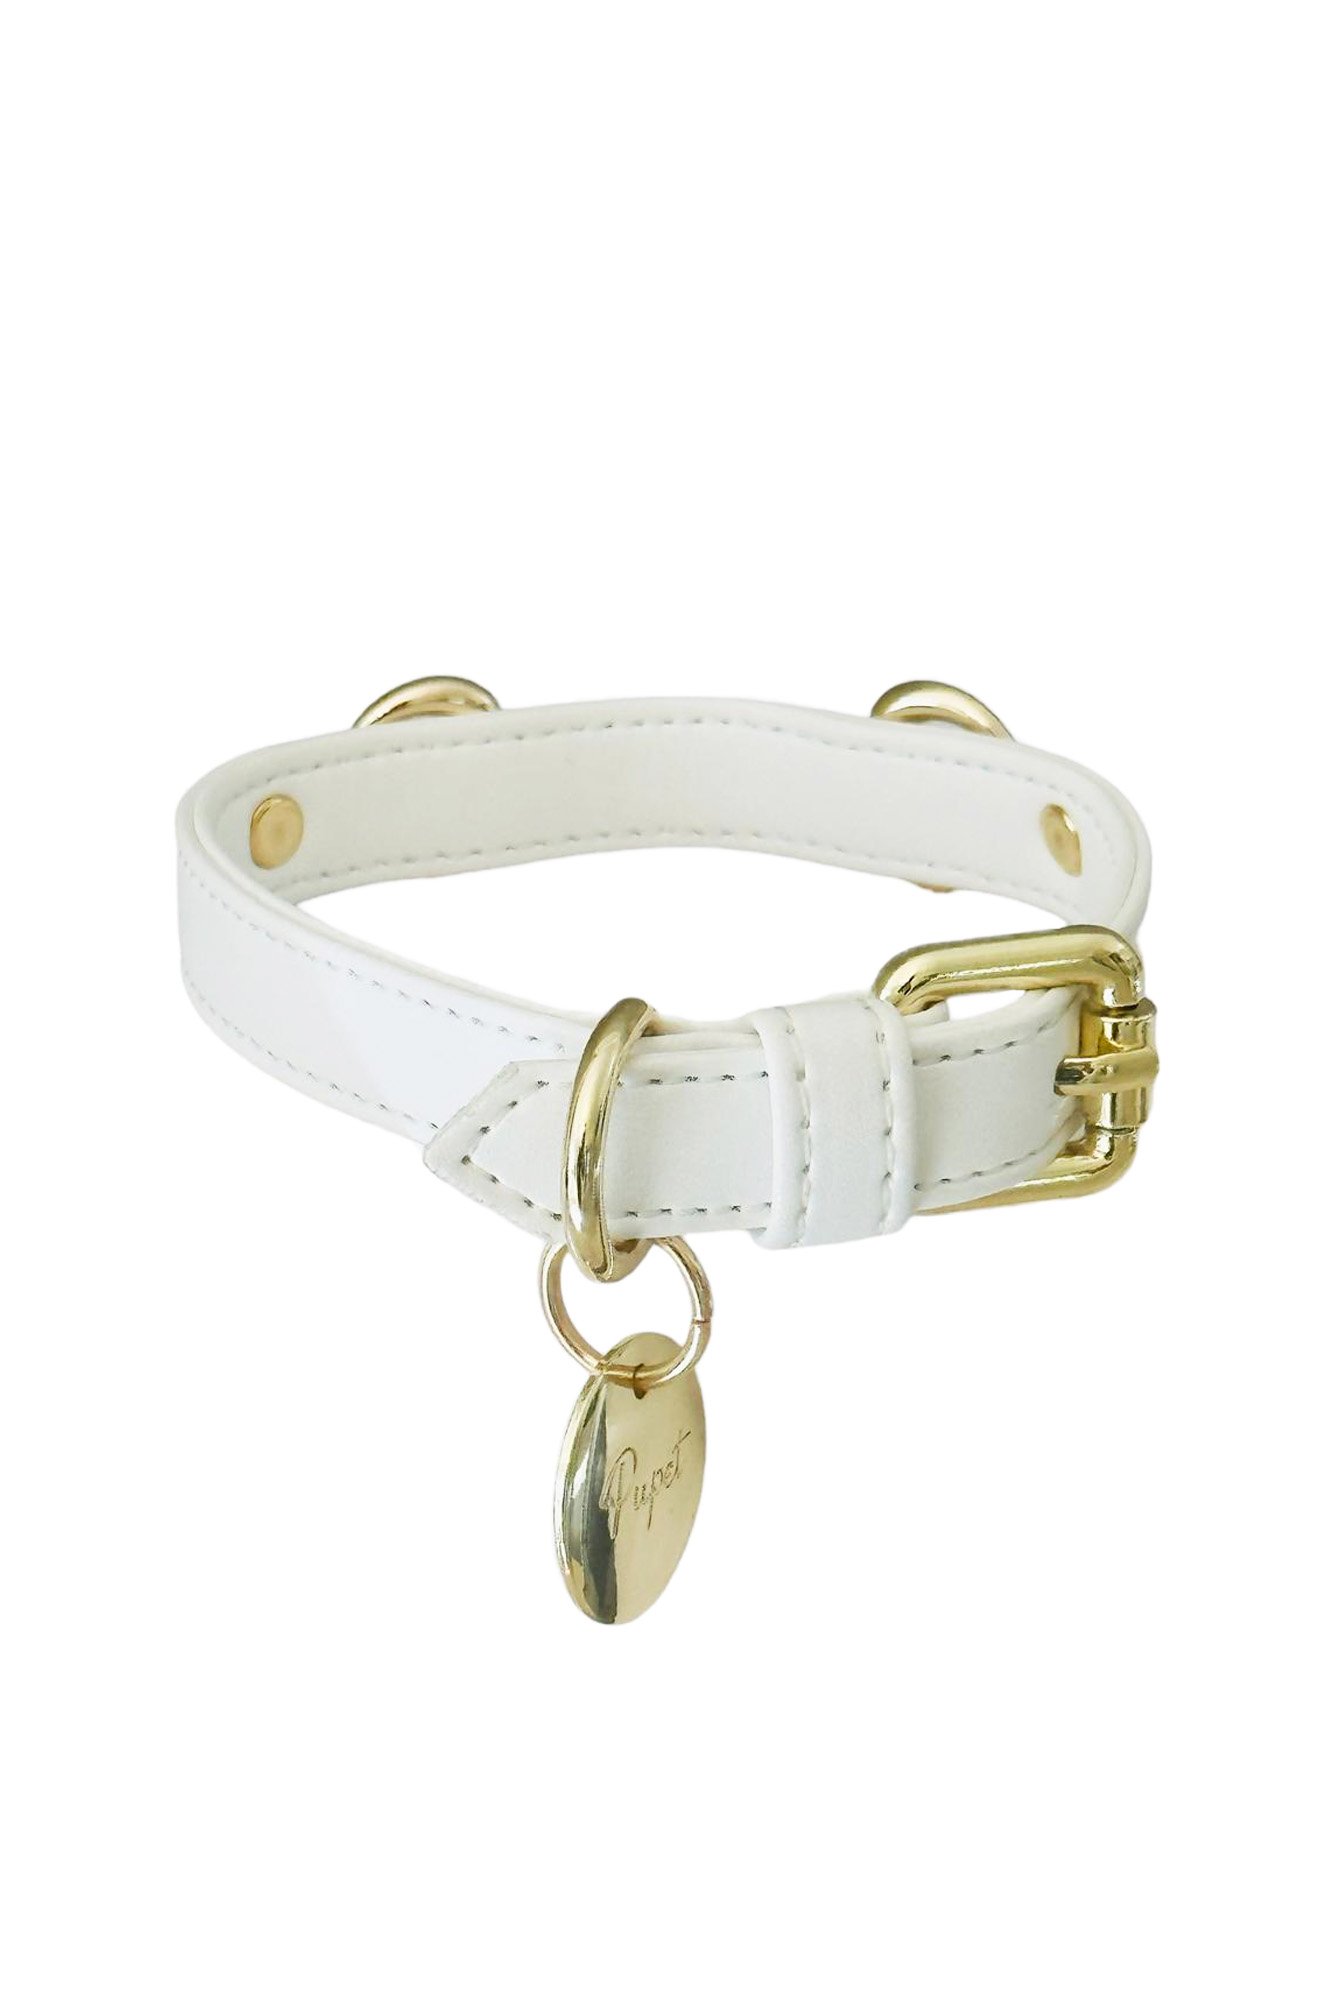 LEATHERETTE COLLAR WITH GOLDEN CLAMP